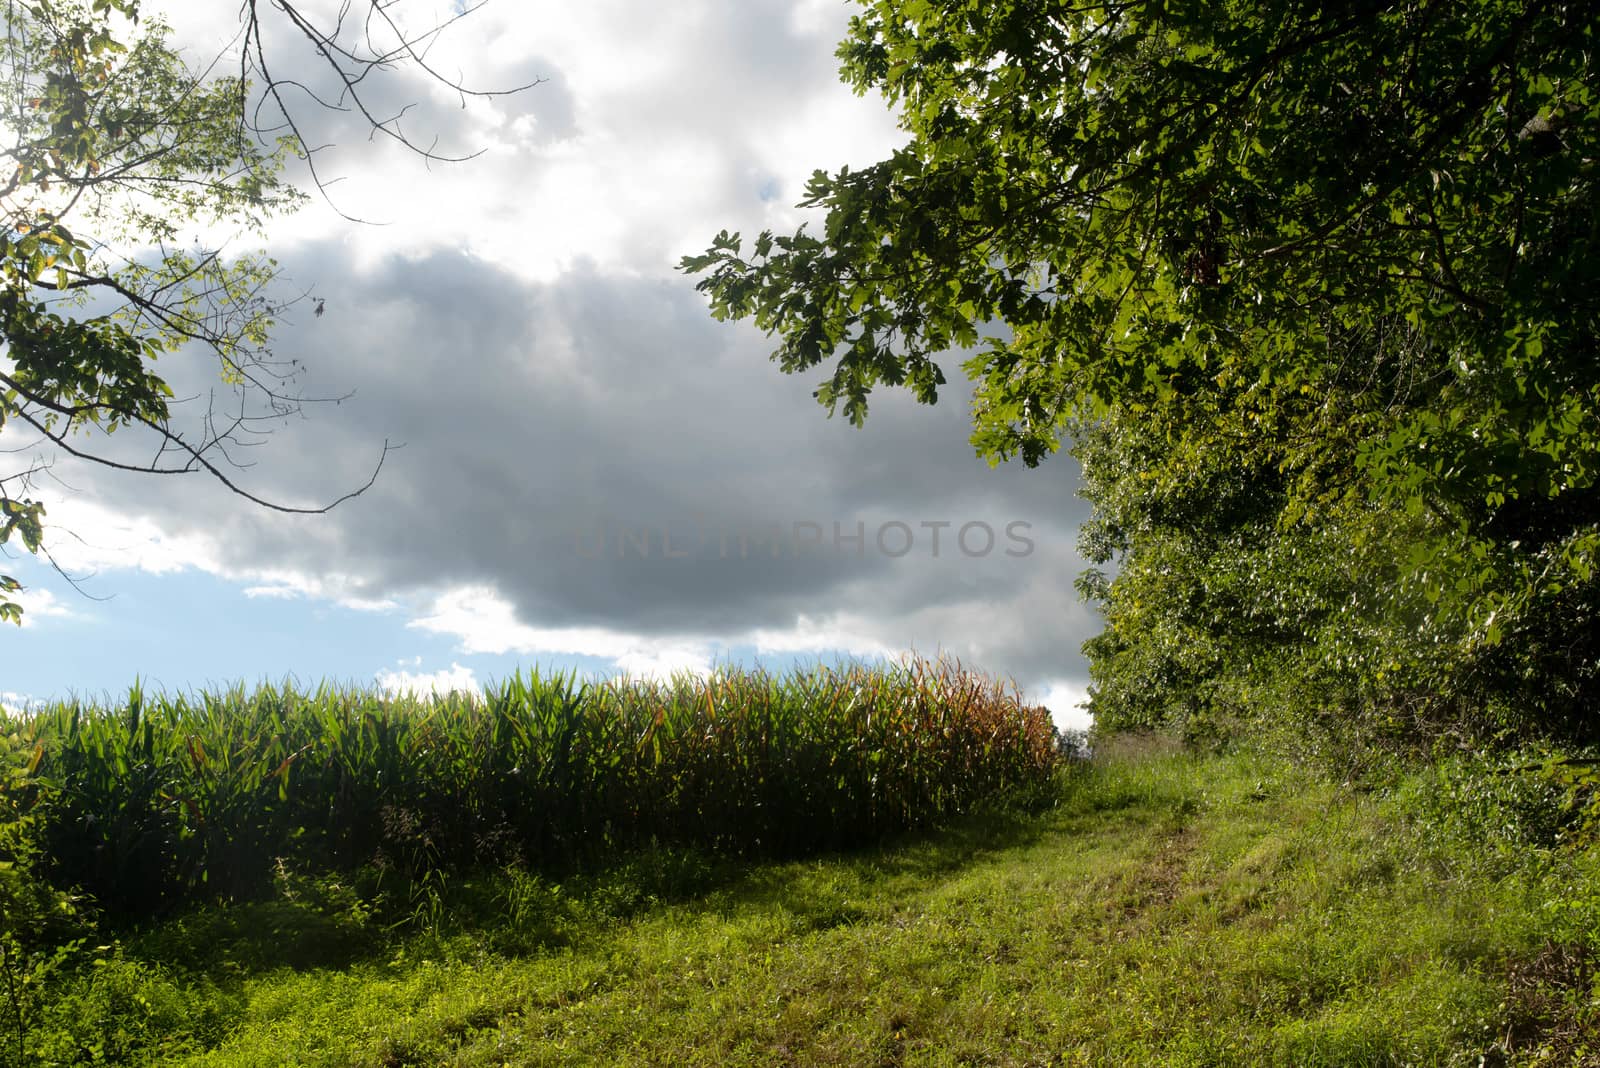 Idyllic rural landscape is overtaken by dark clouds in this beautiful full frame image in natural light with copy space.